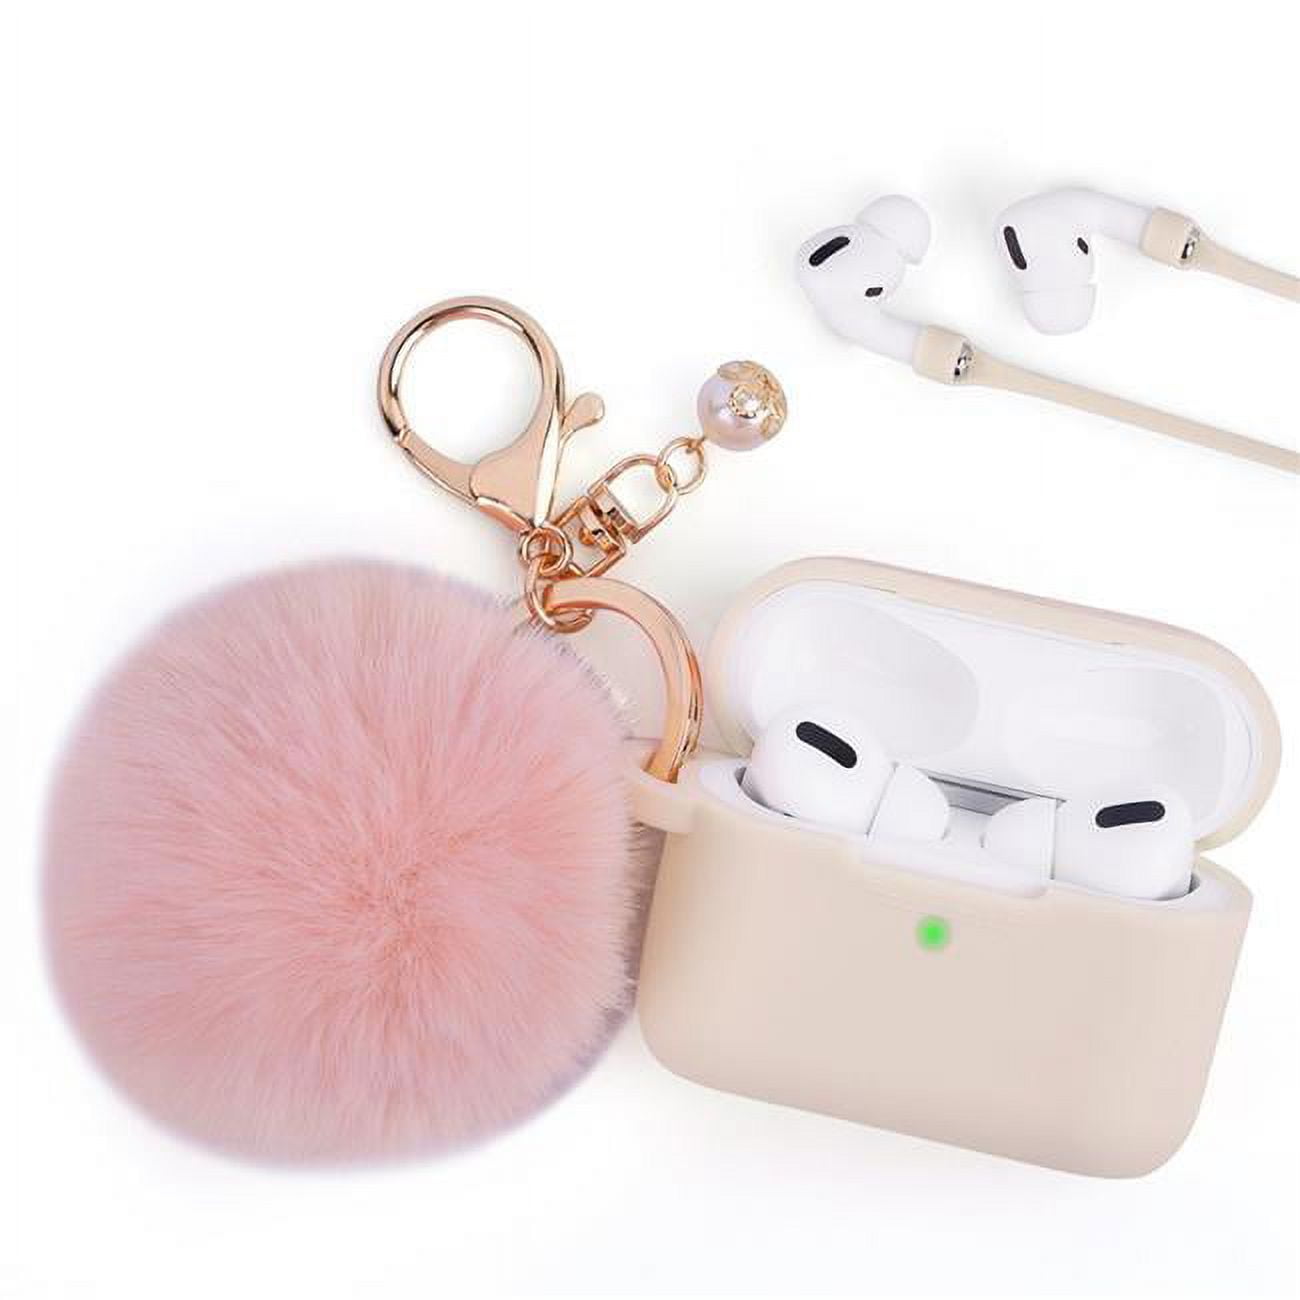 CAAPR-FURB-SD Furbulous Collection 3 in 1 Thick Silicone TPU Case with Fur Ball Ornament Key Chain & Strap for Airpods Pro - Sand -  Iphone